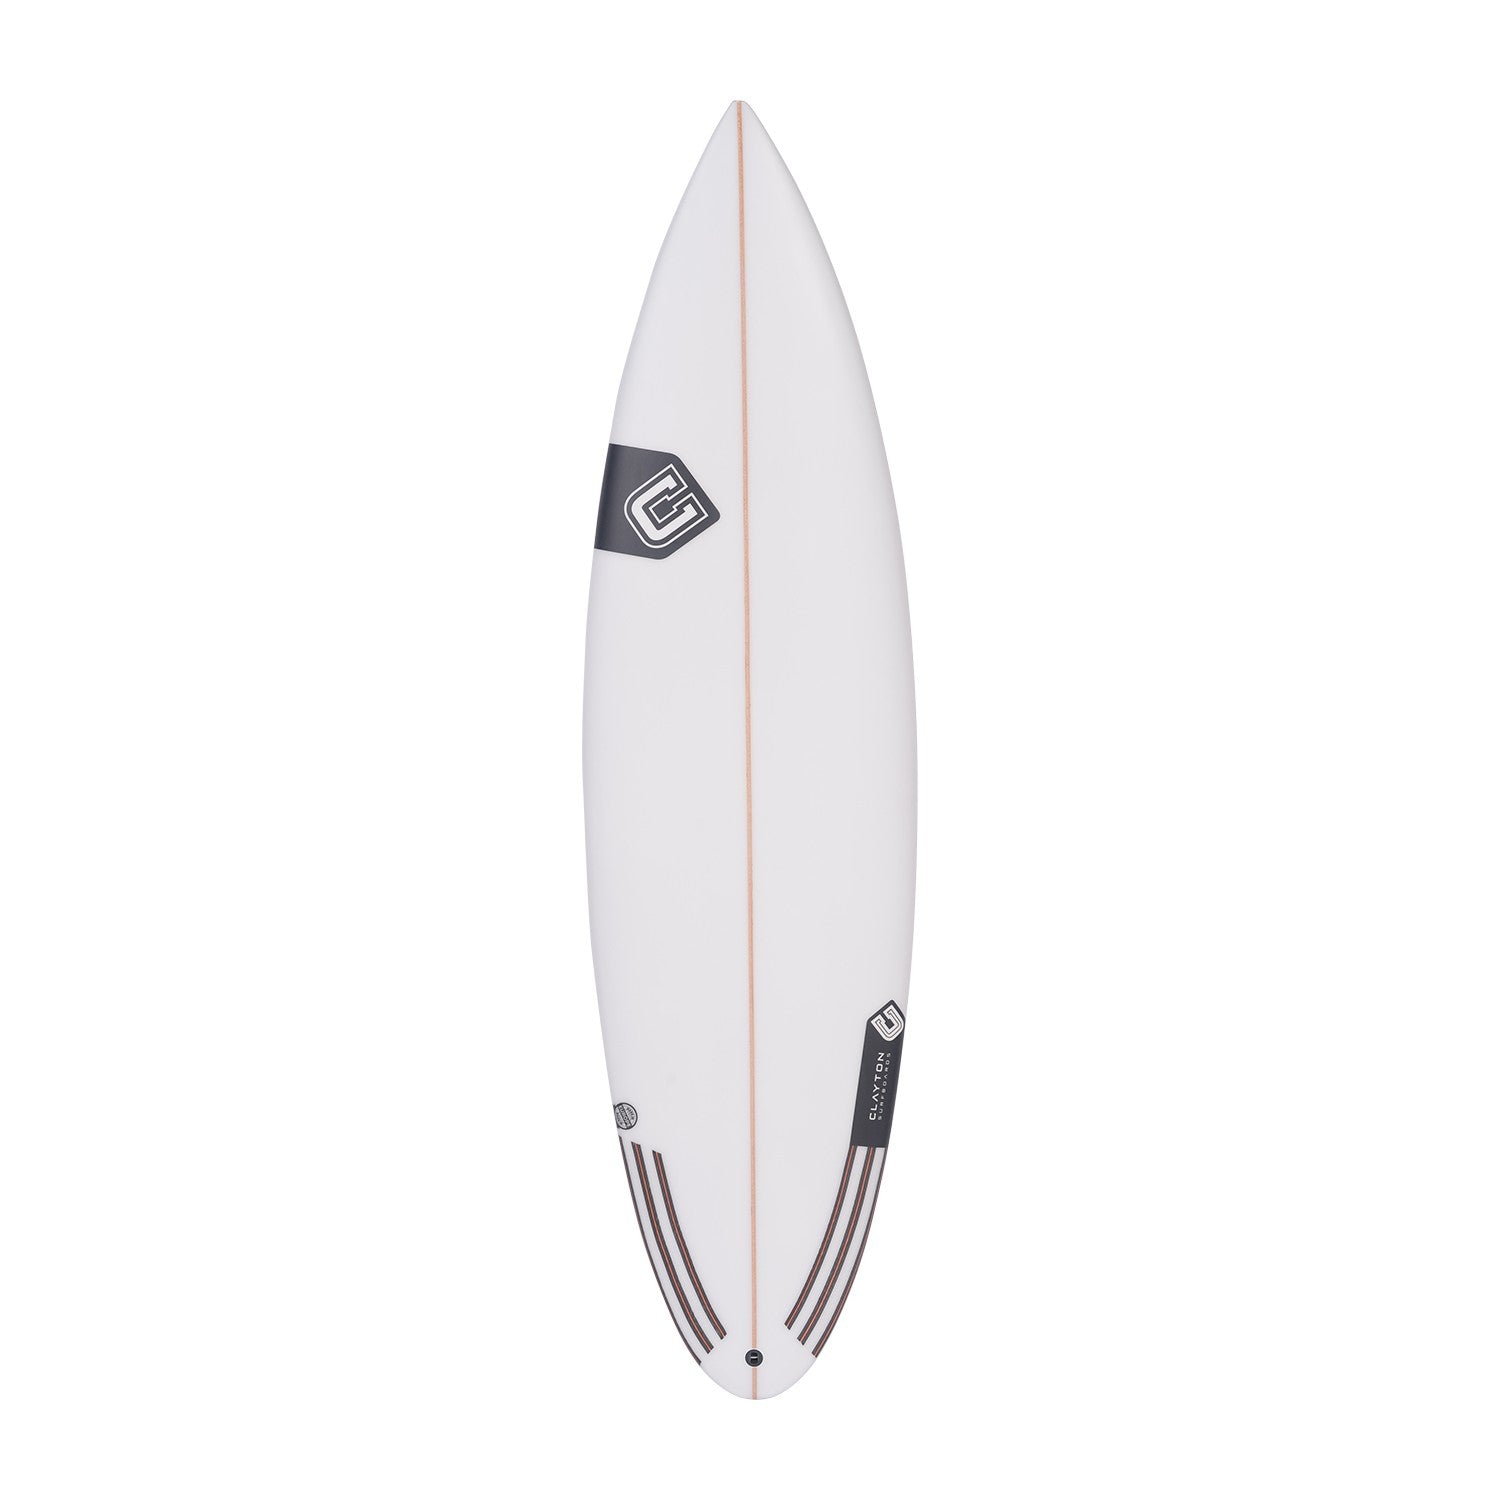 CLAYTON Surfboards - Clay10 Pro (PU) Futures - 6'1